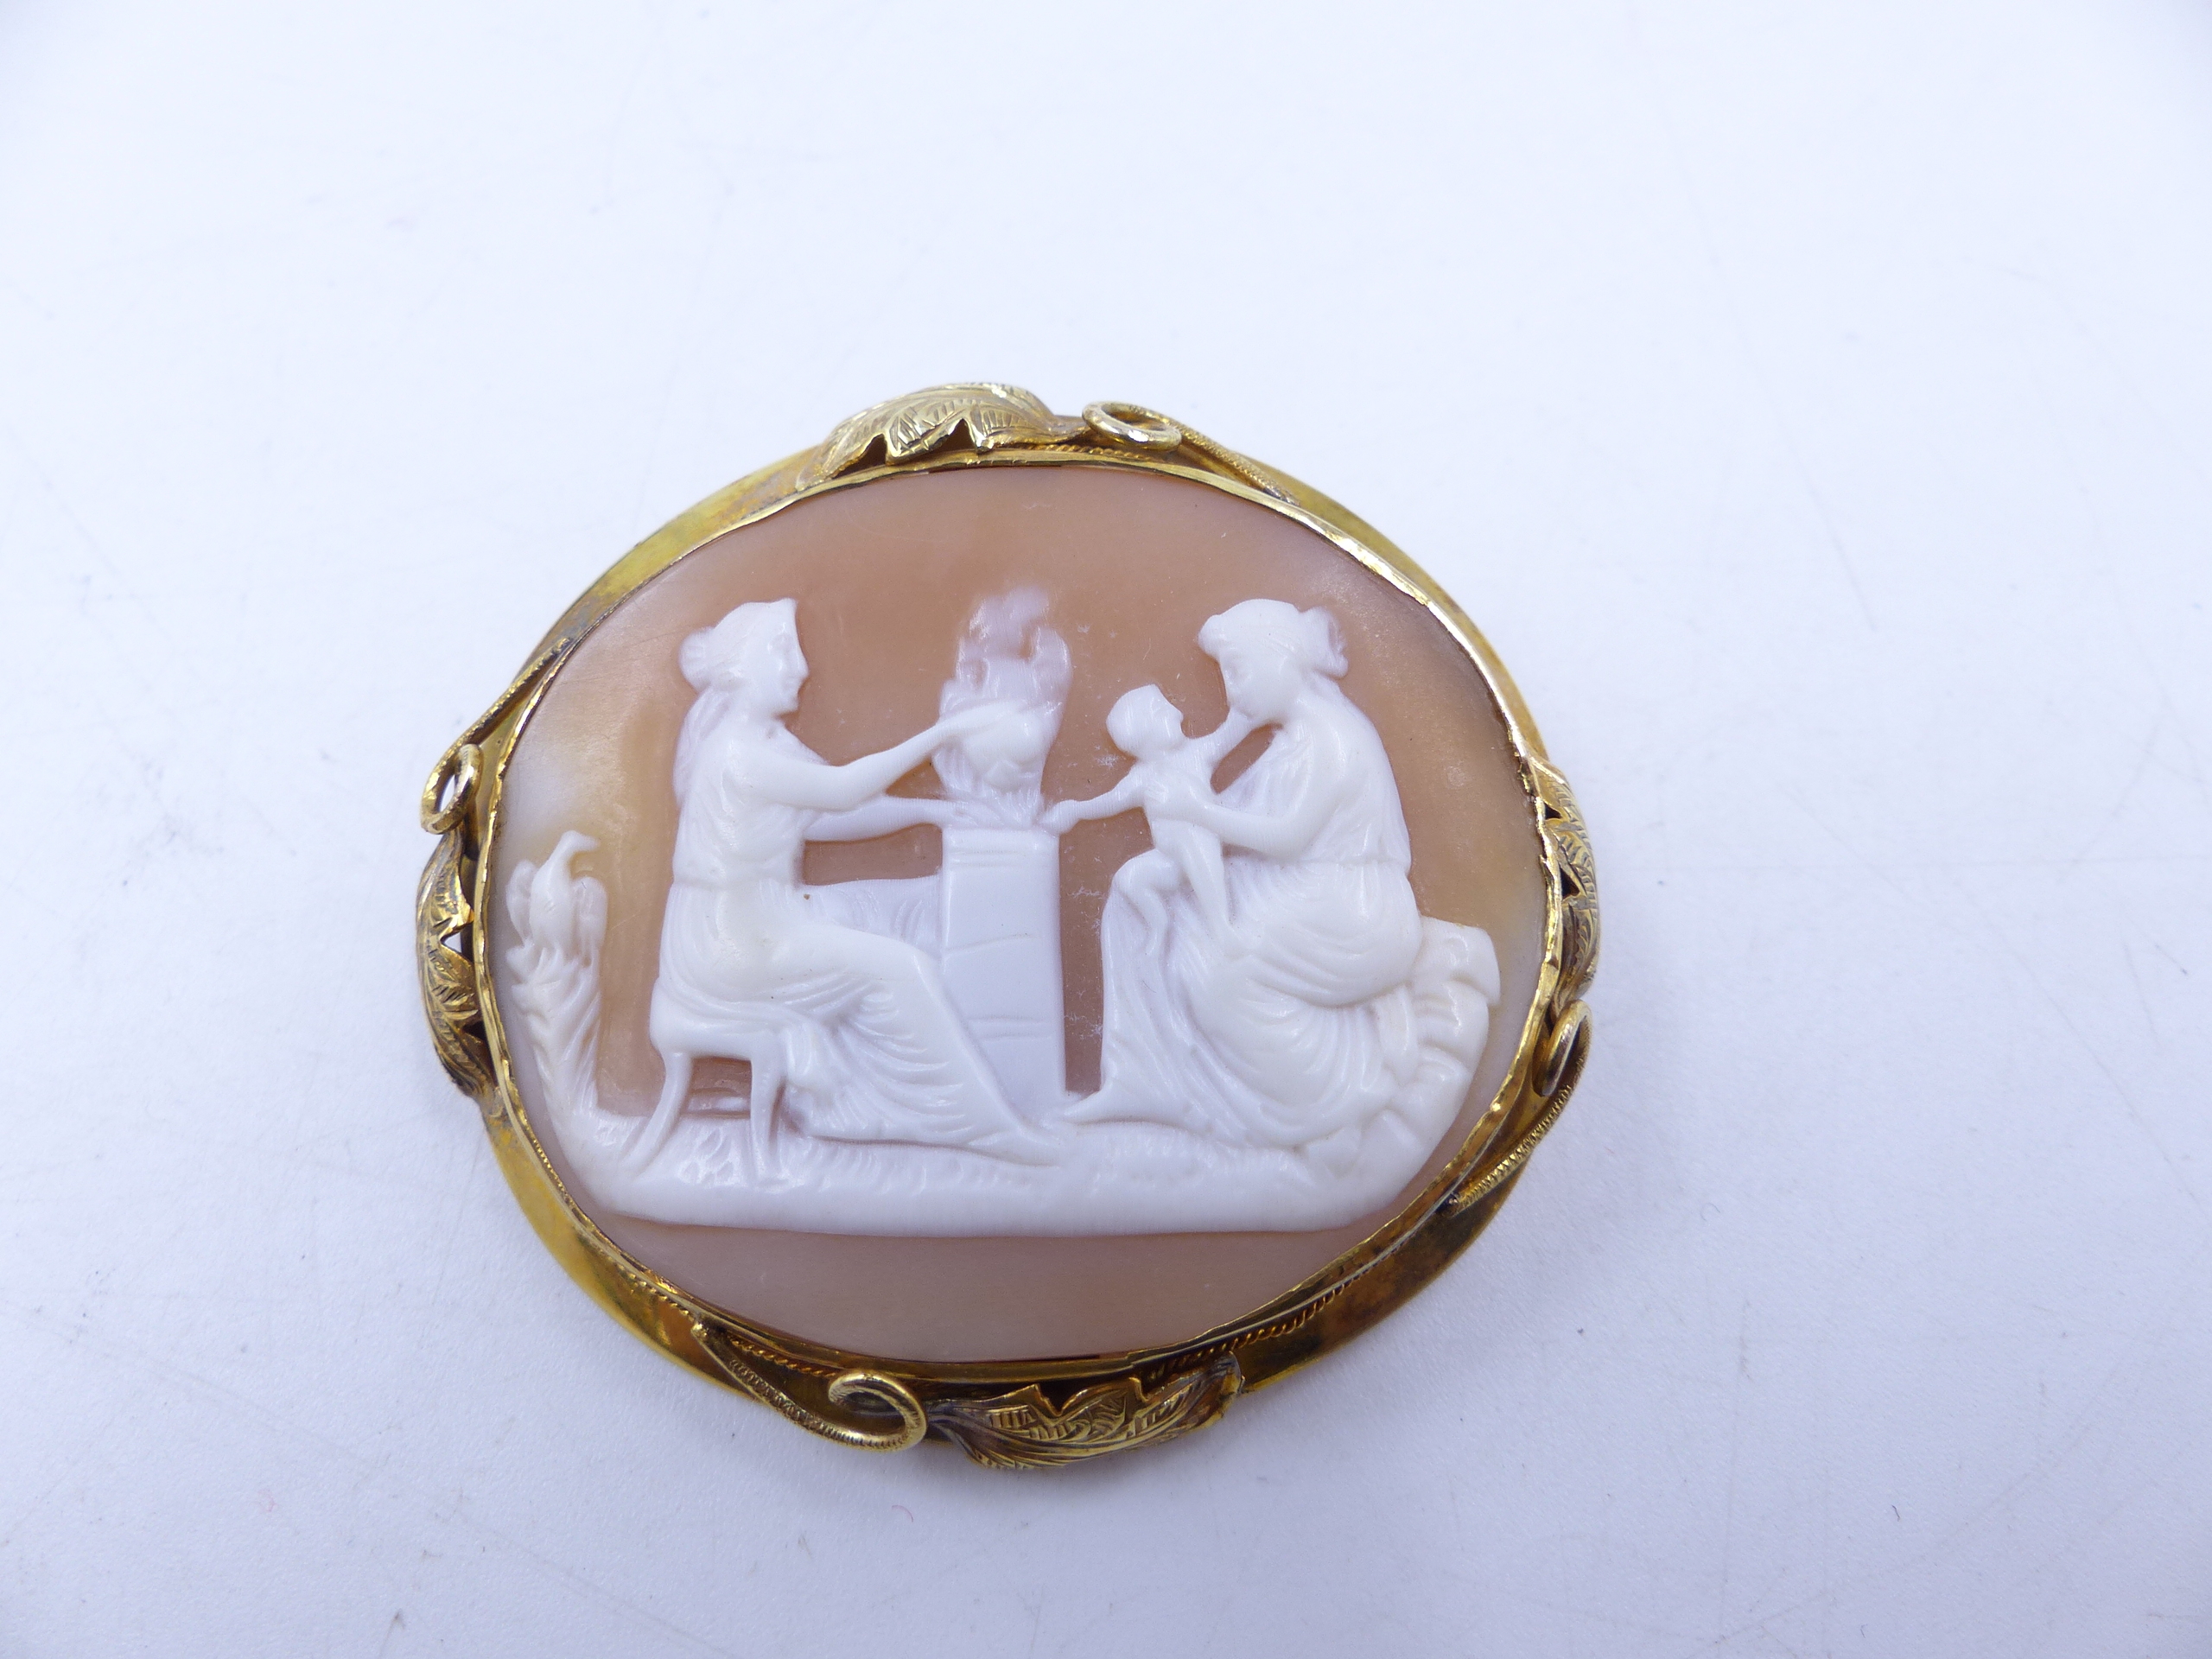 A PORTRAIT CAMEO BROOCH FACING LEFT POSSIBLY OF QUEEN VICTORIA IN A FLUTED YELLOW METAL SETTING, - Image 8 of 12